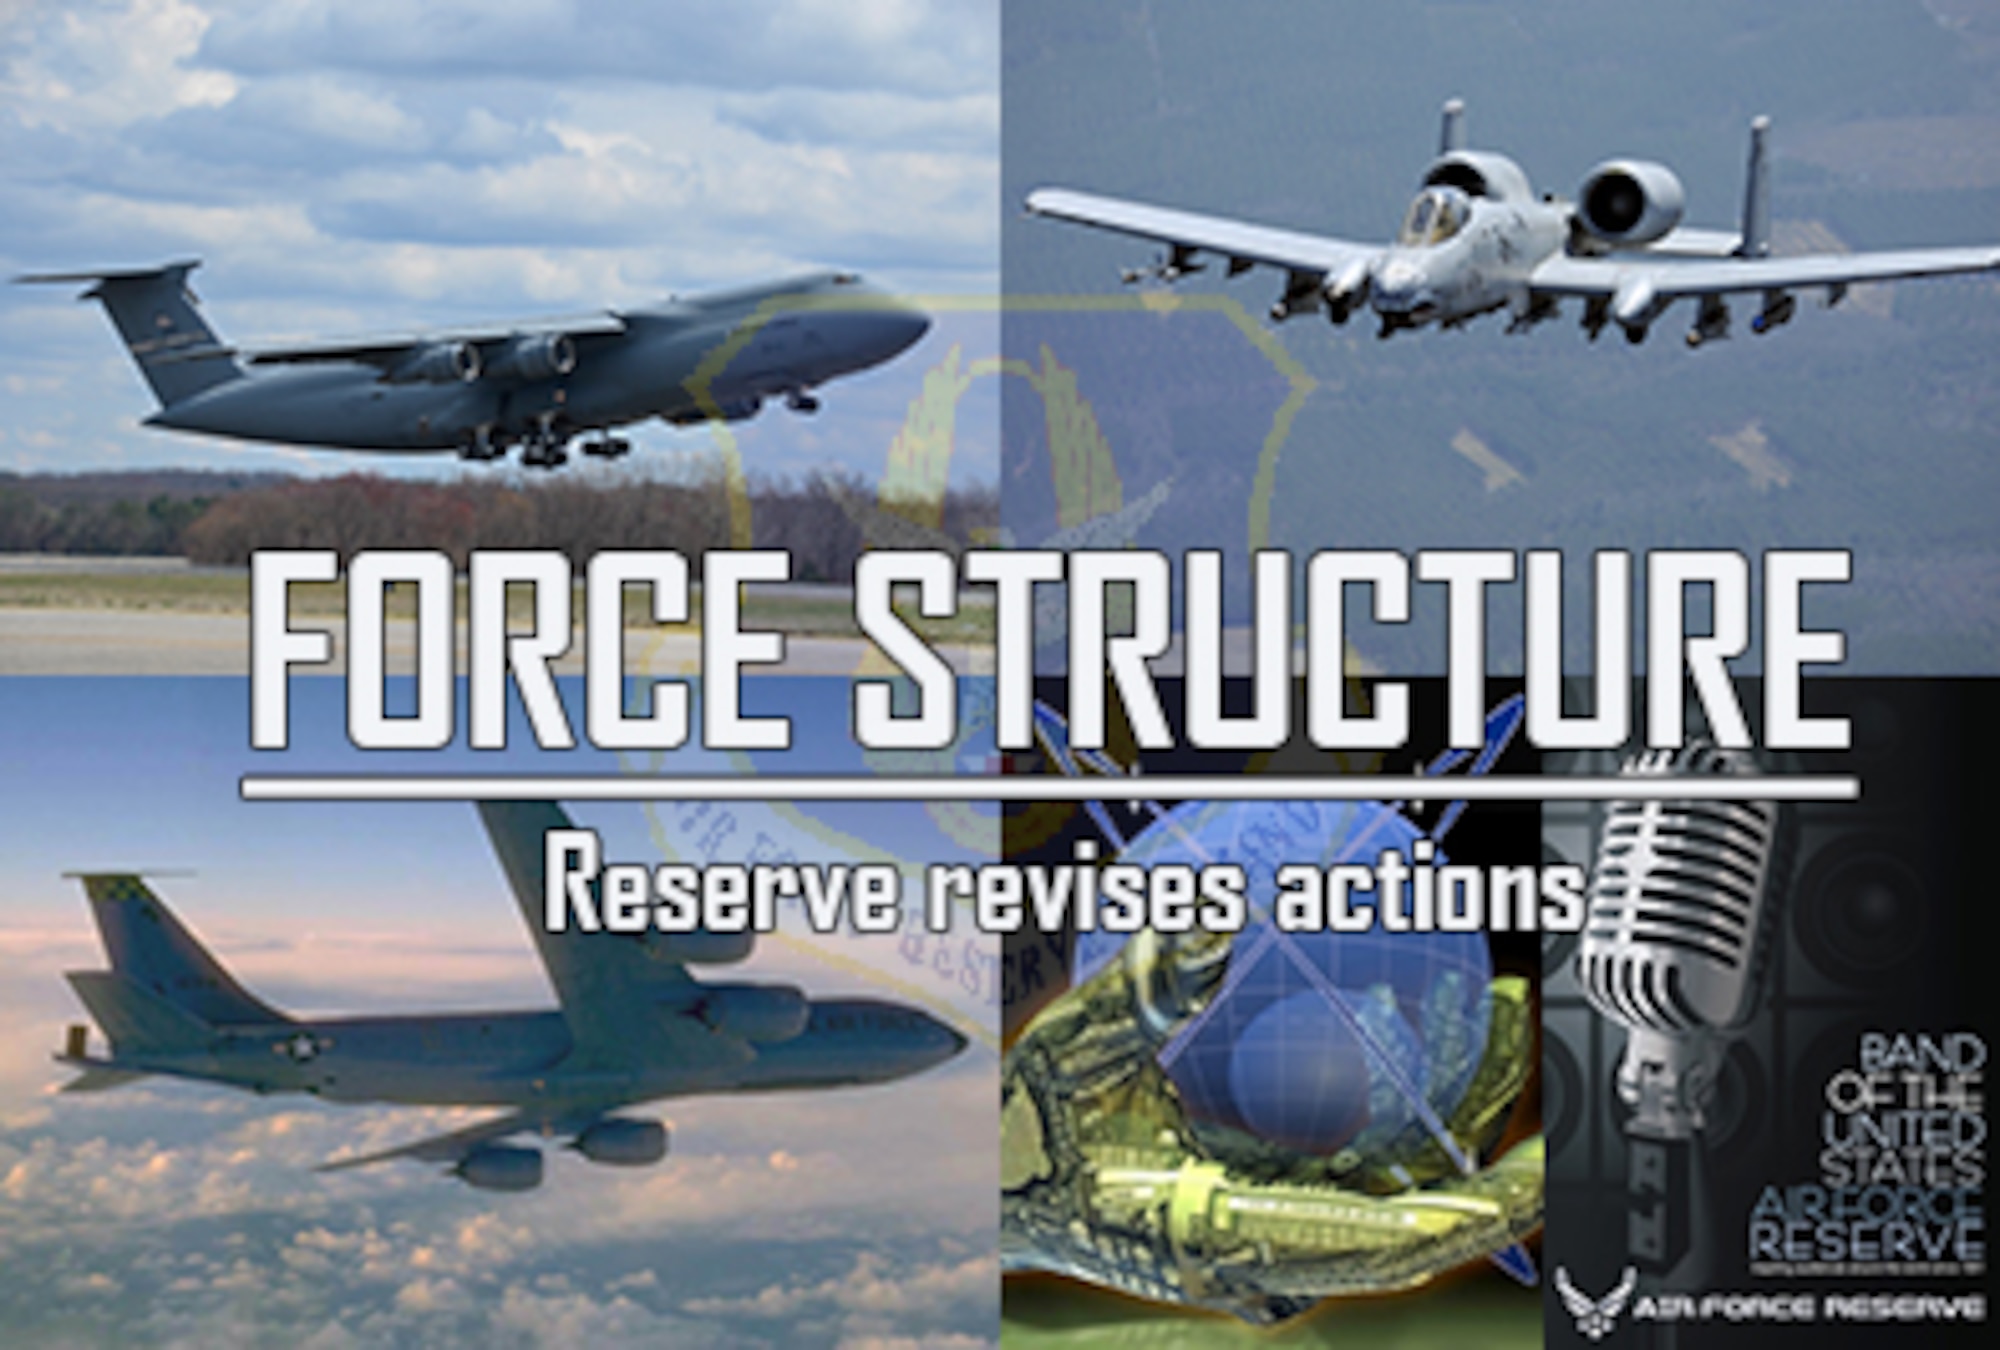 Air Force Reserve Command is moving forward with force structure changes authorized by the National Defense Authorization Act for fiscal 2013. Major actions include creation of intelligence, cyber and network warfare units; retirement of some C-5A, KC-135 and A-10 aircraft; and the inactivation of the Band of the U.S. Air Force Reserve and a reconnaissance squadron. (U.S. Air Force graphic/Philip Rhodes)  